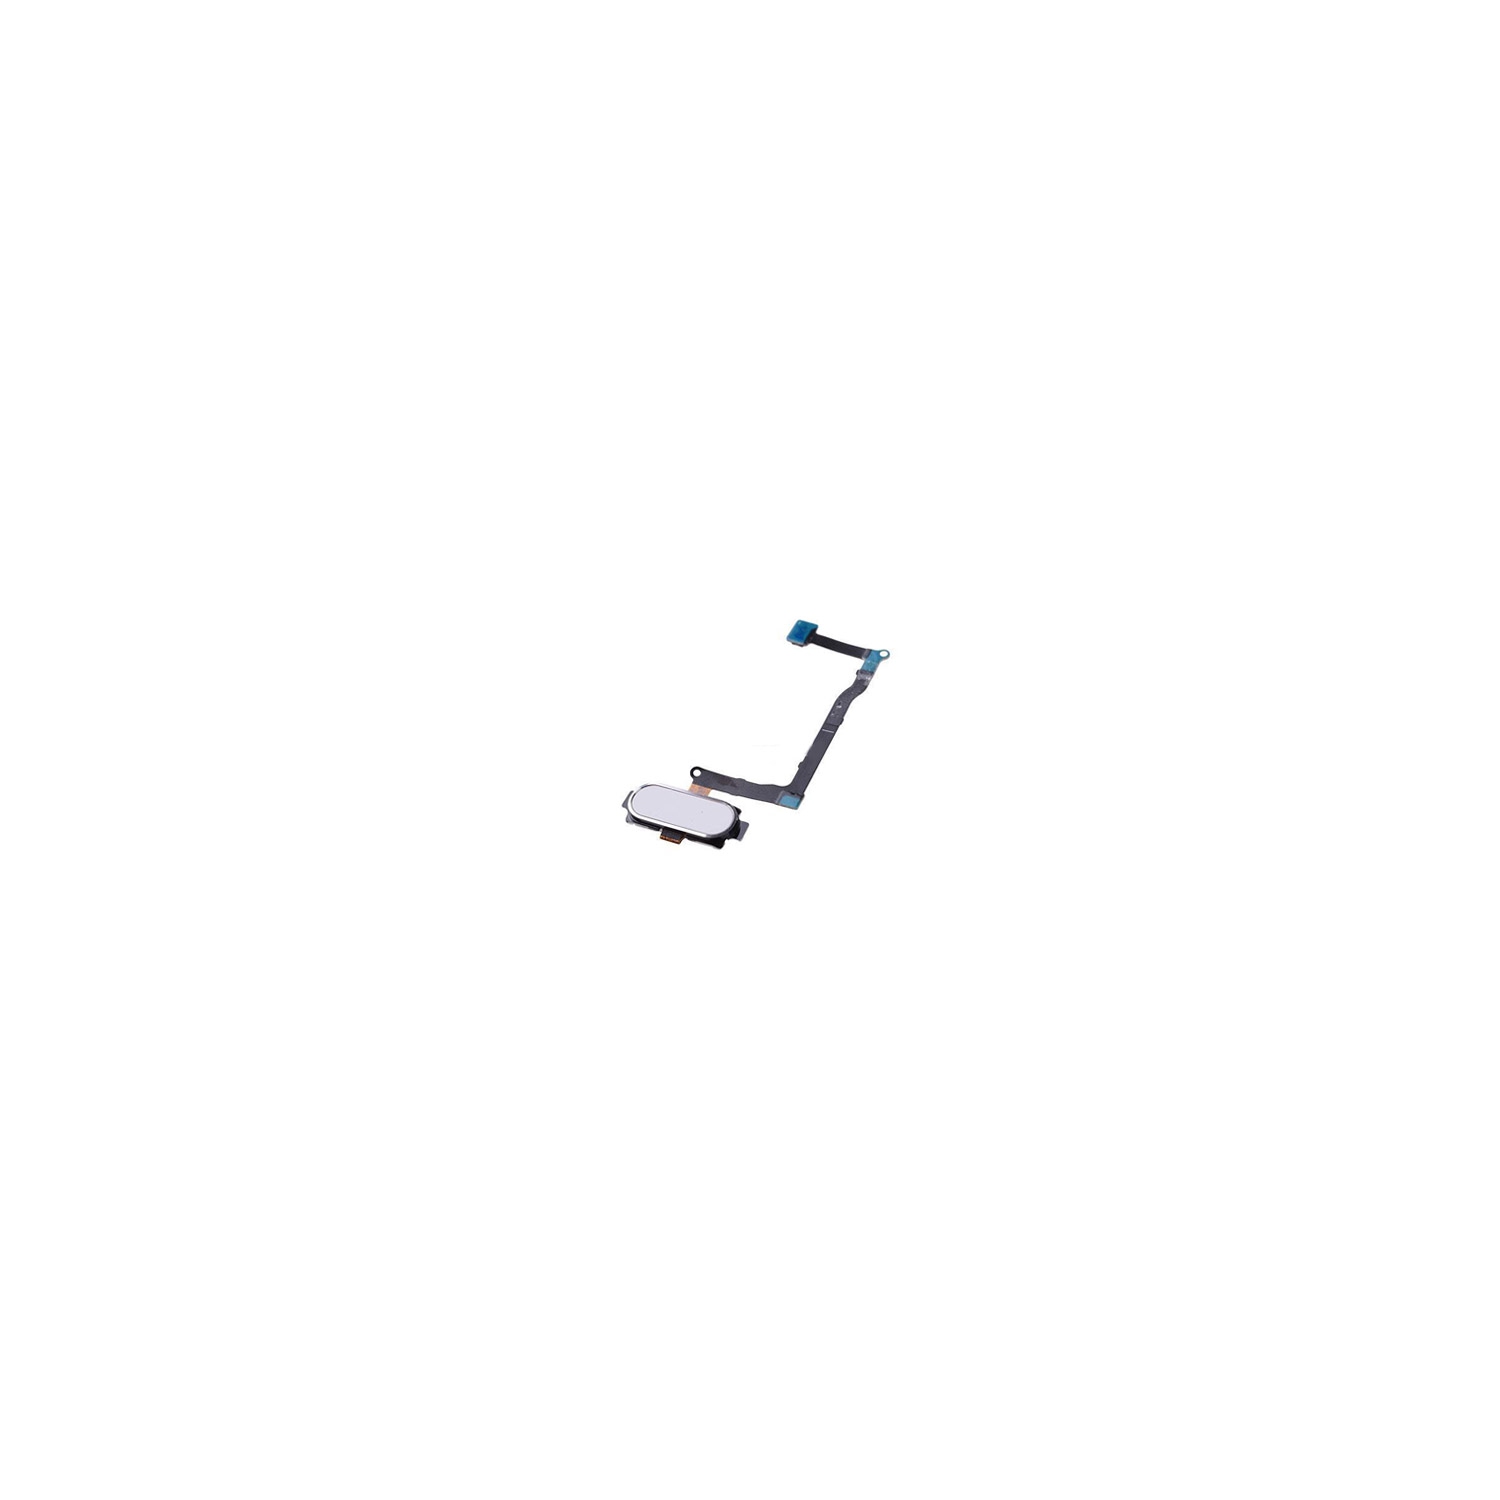 Samsung Galaxy Note 5 Series Home Button With Flex Cable Ribbon Replacement - White